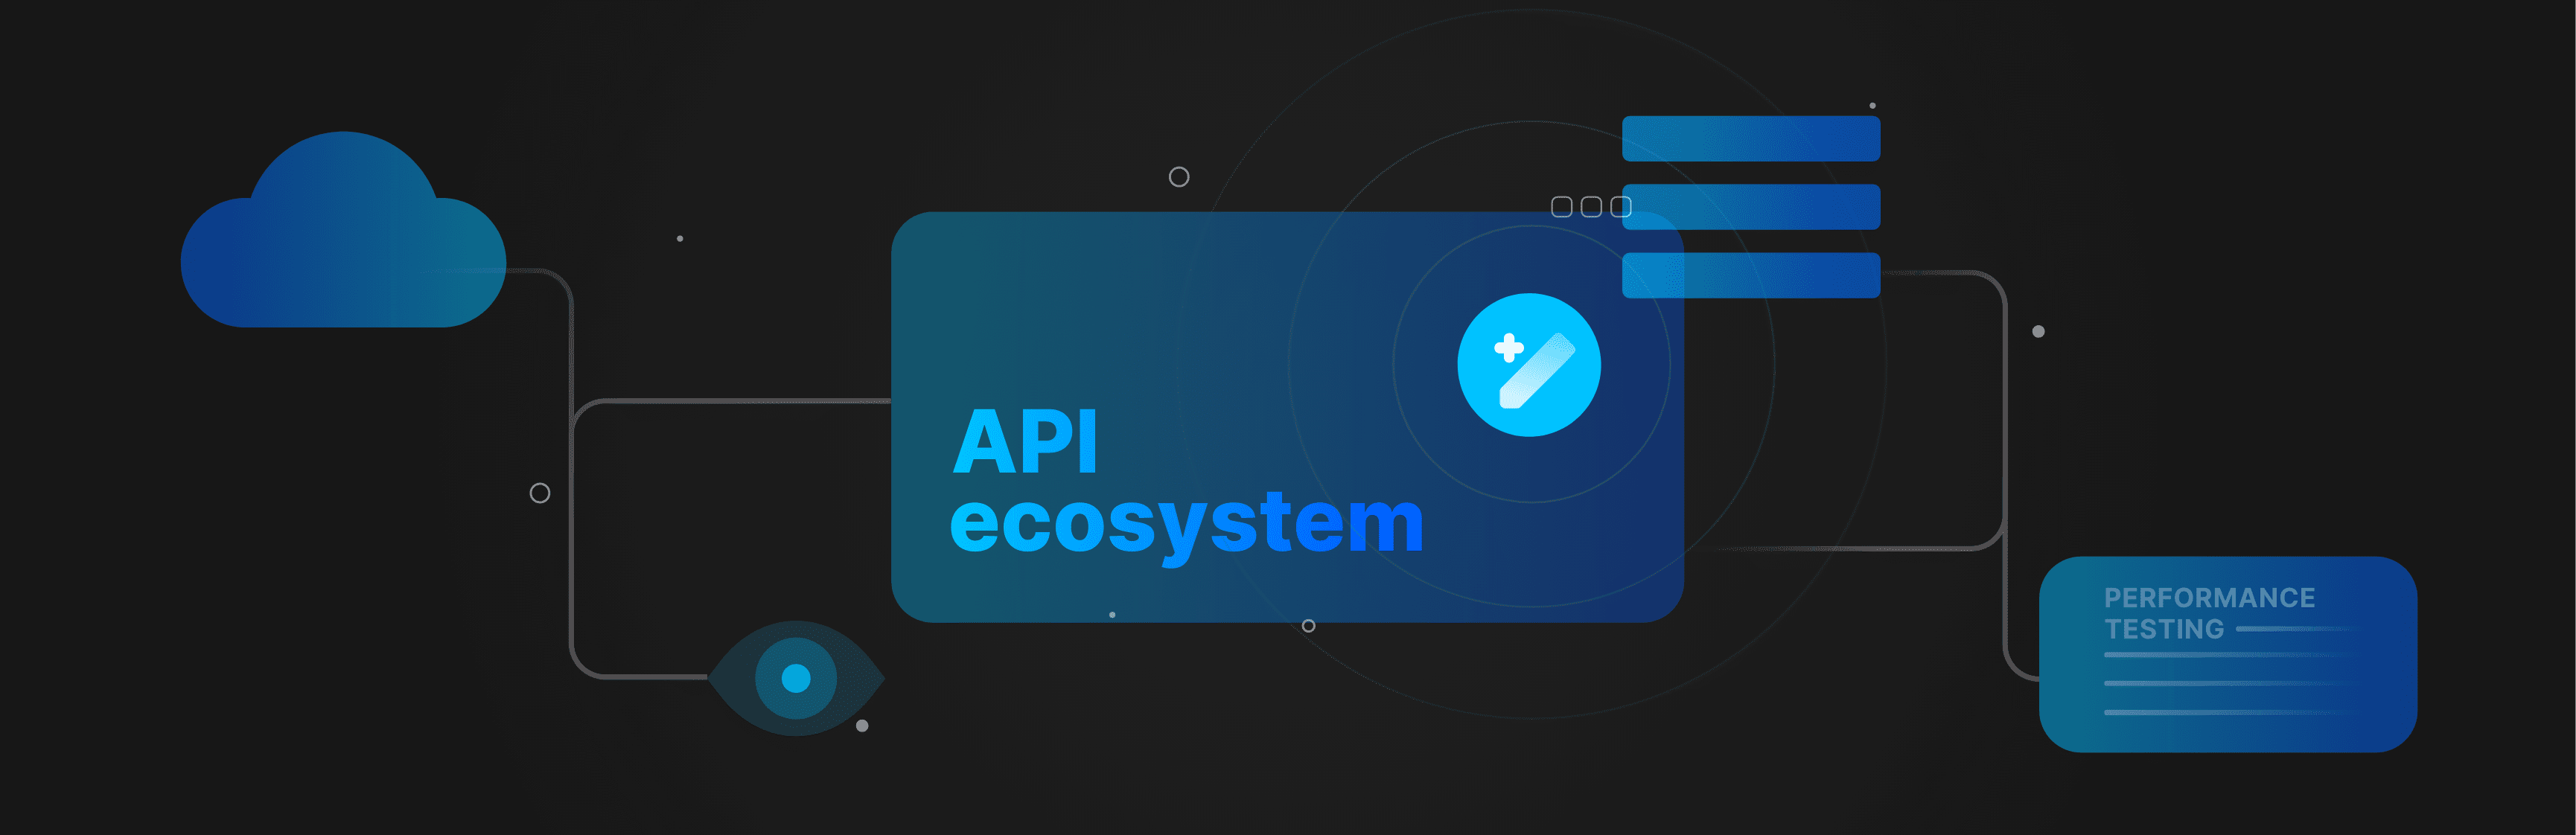 Creating an efficient API ecosystem from scratch: The do’s and don’ts